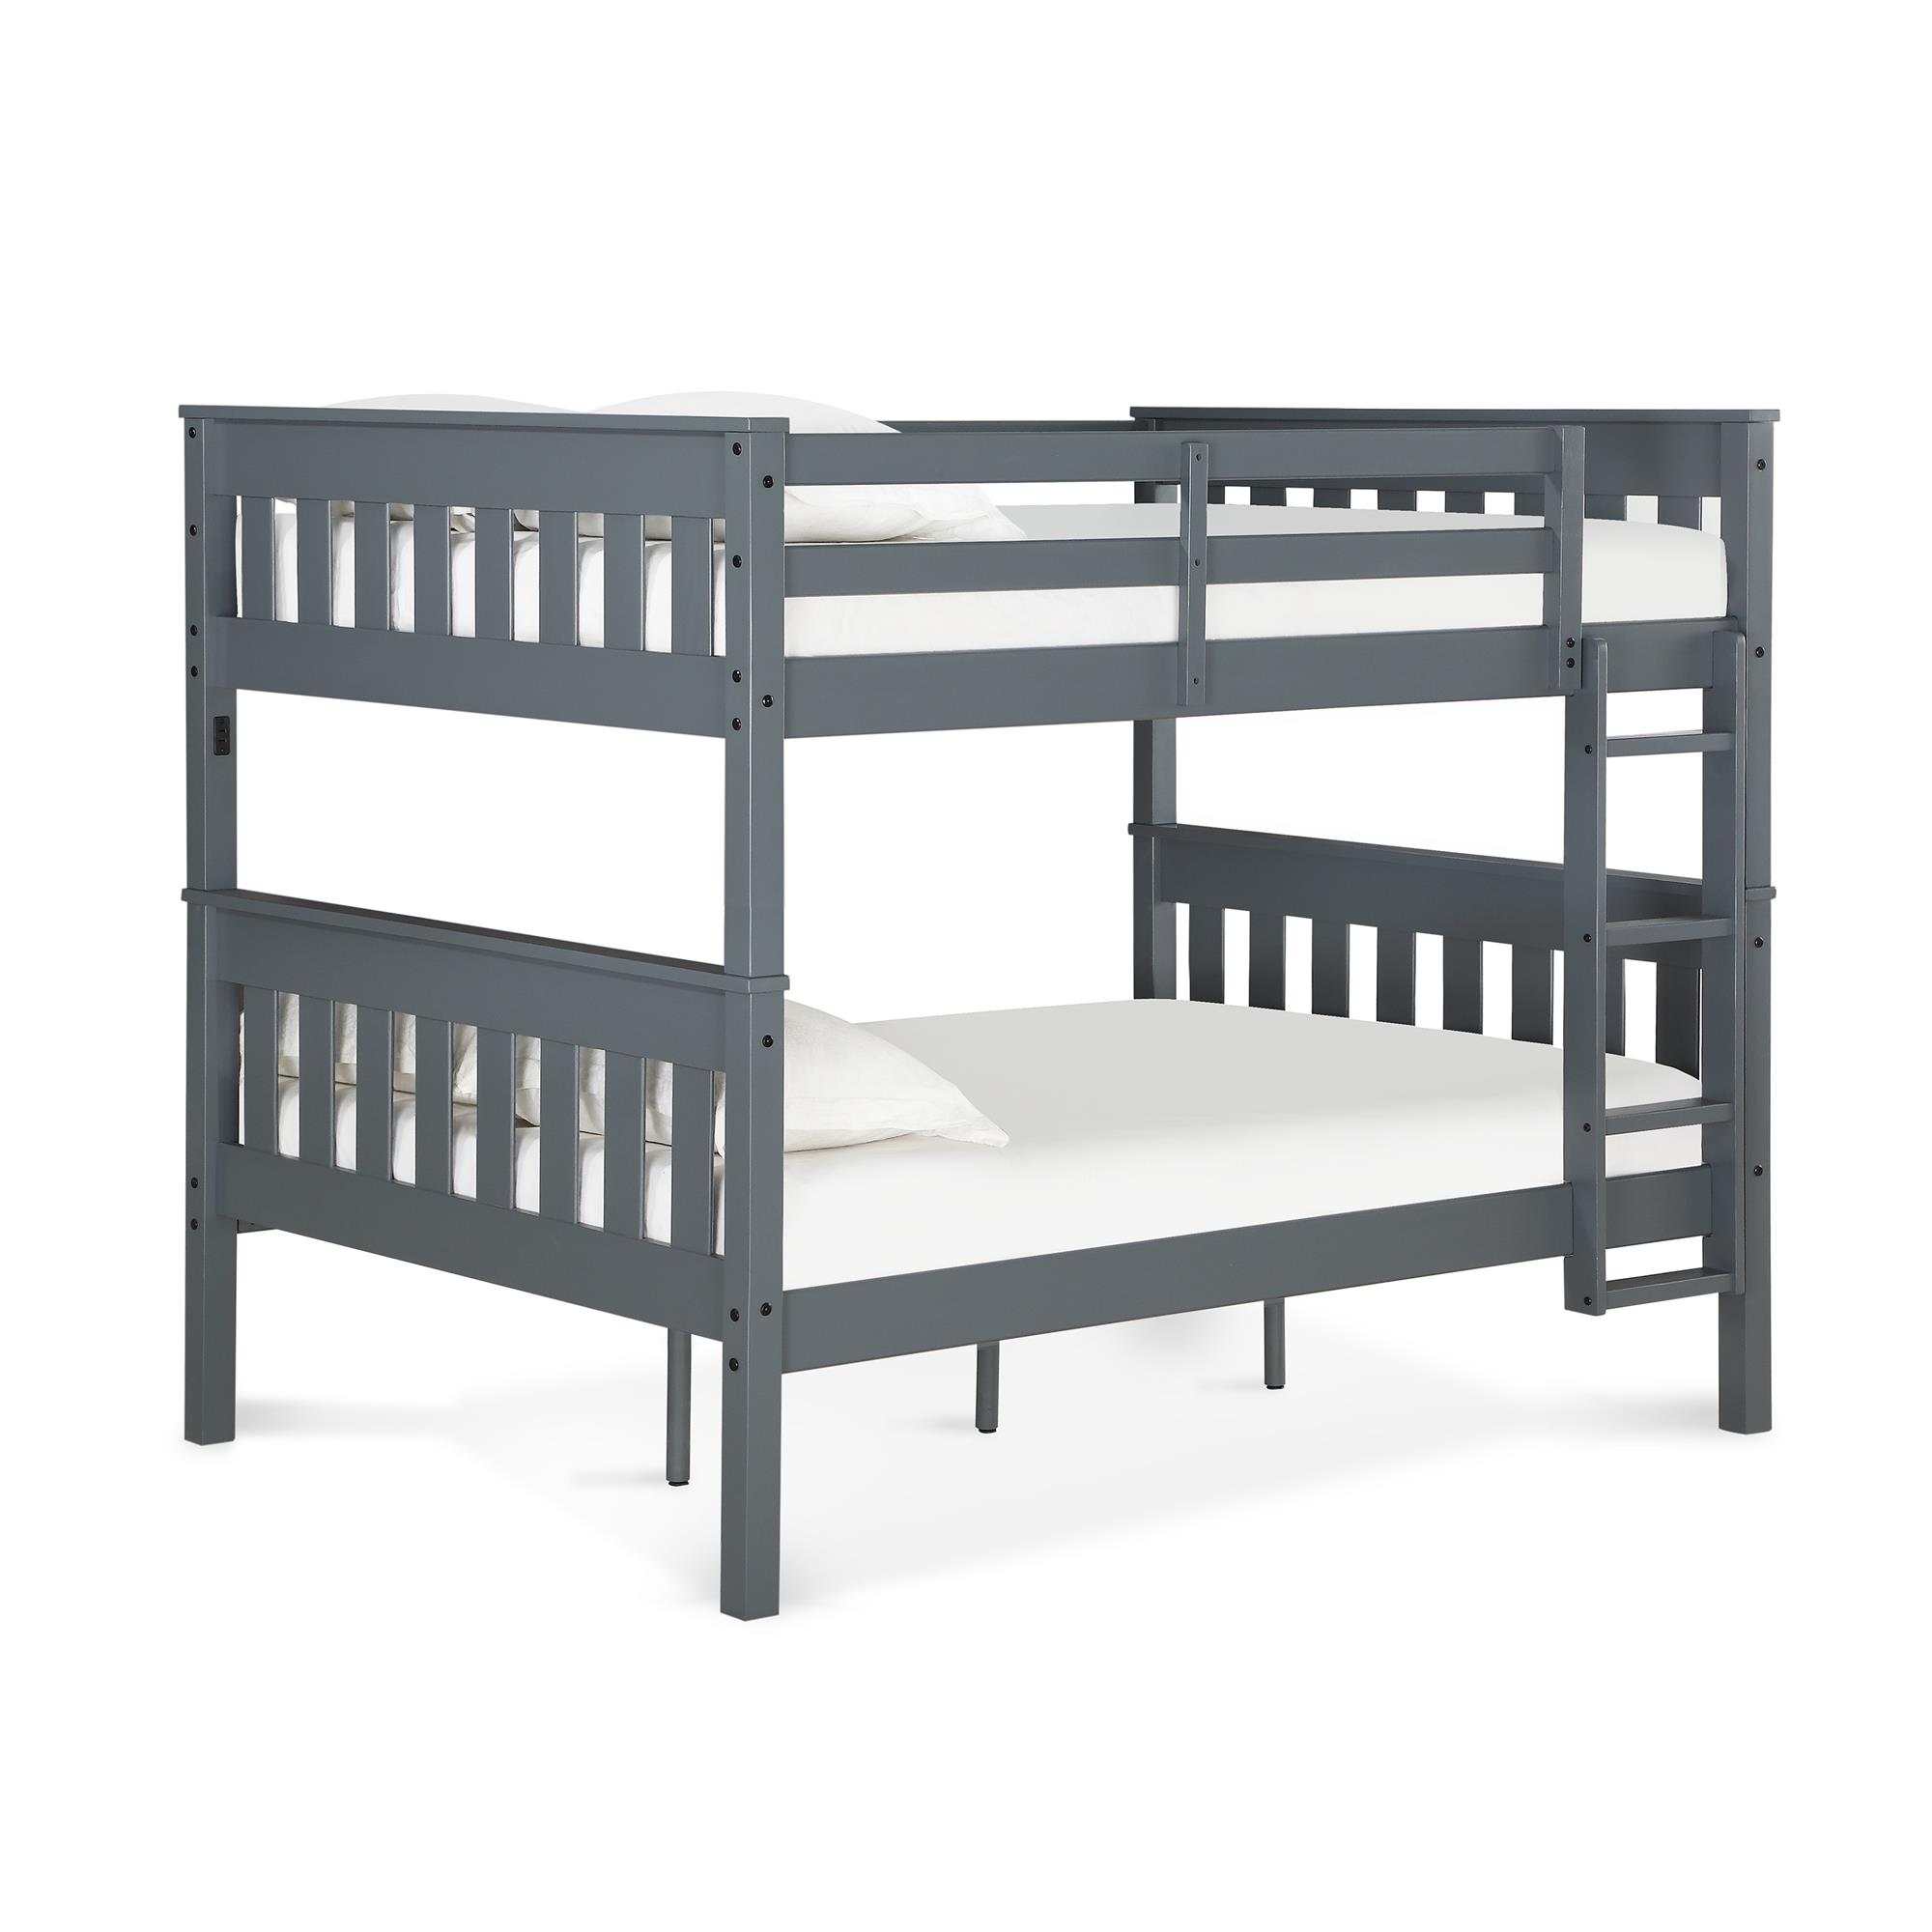 Dorel Living Moon Full over Full Wood Bunk Bed with USB Port in Gray - image 3 of 9